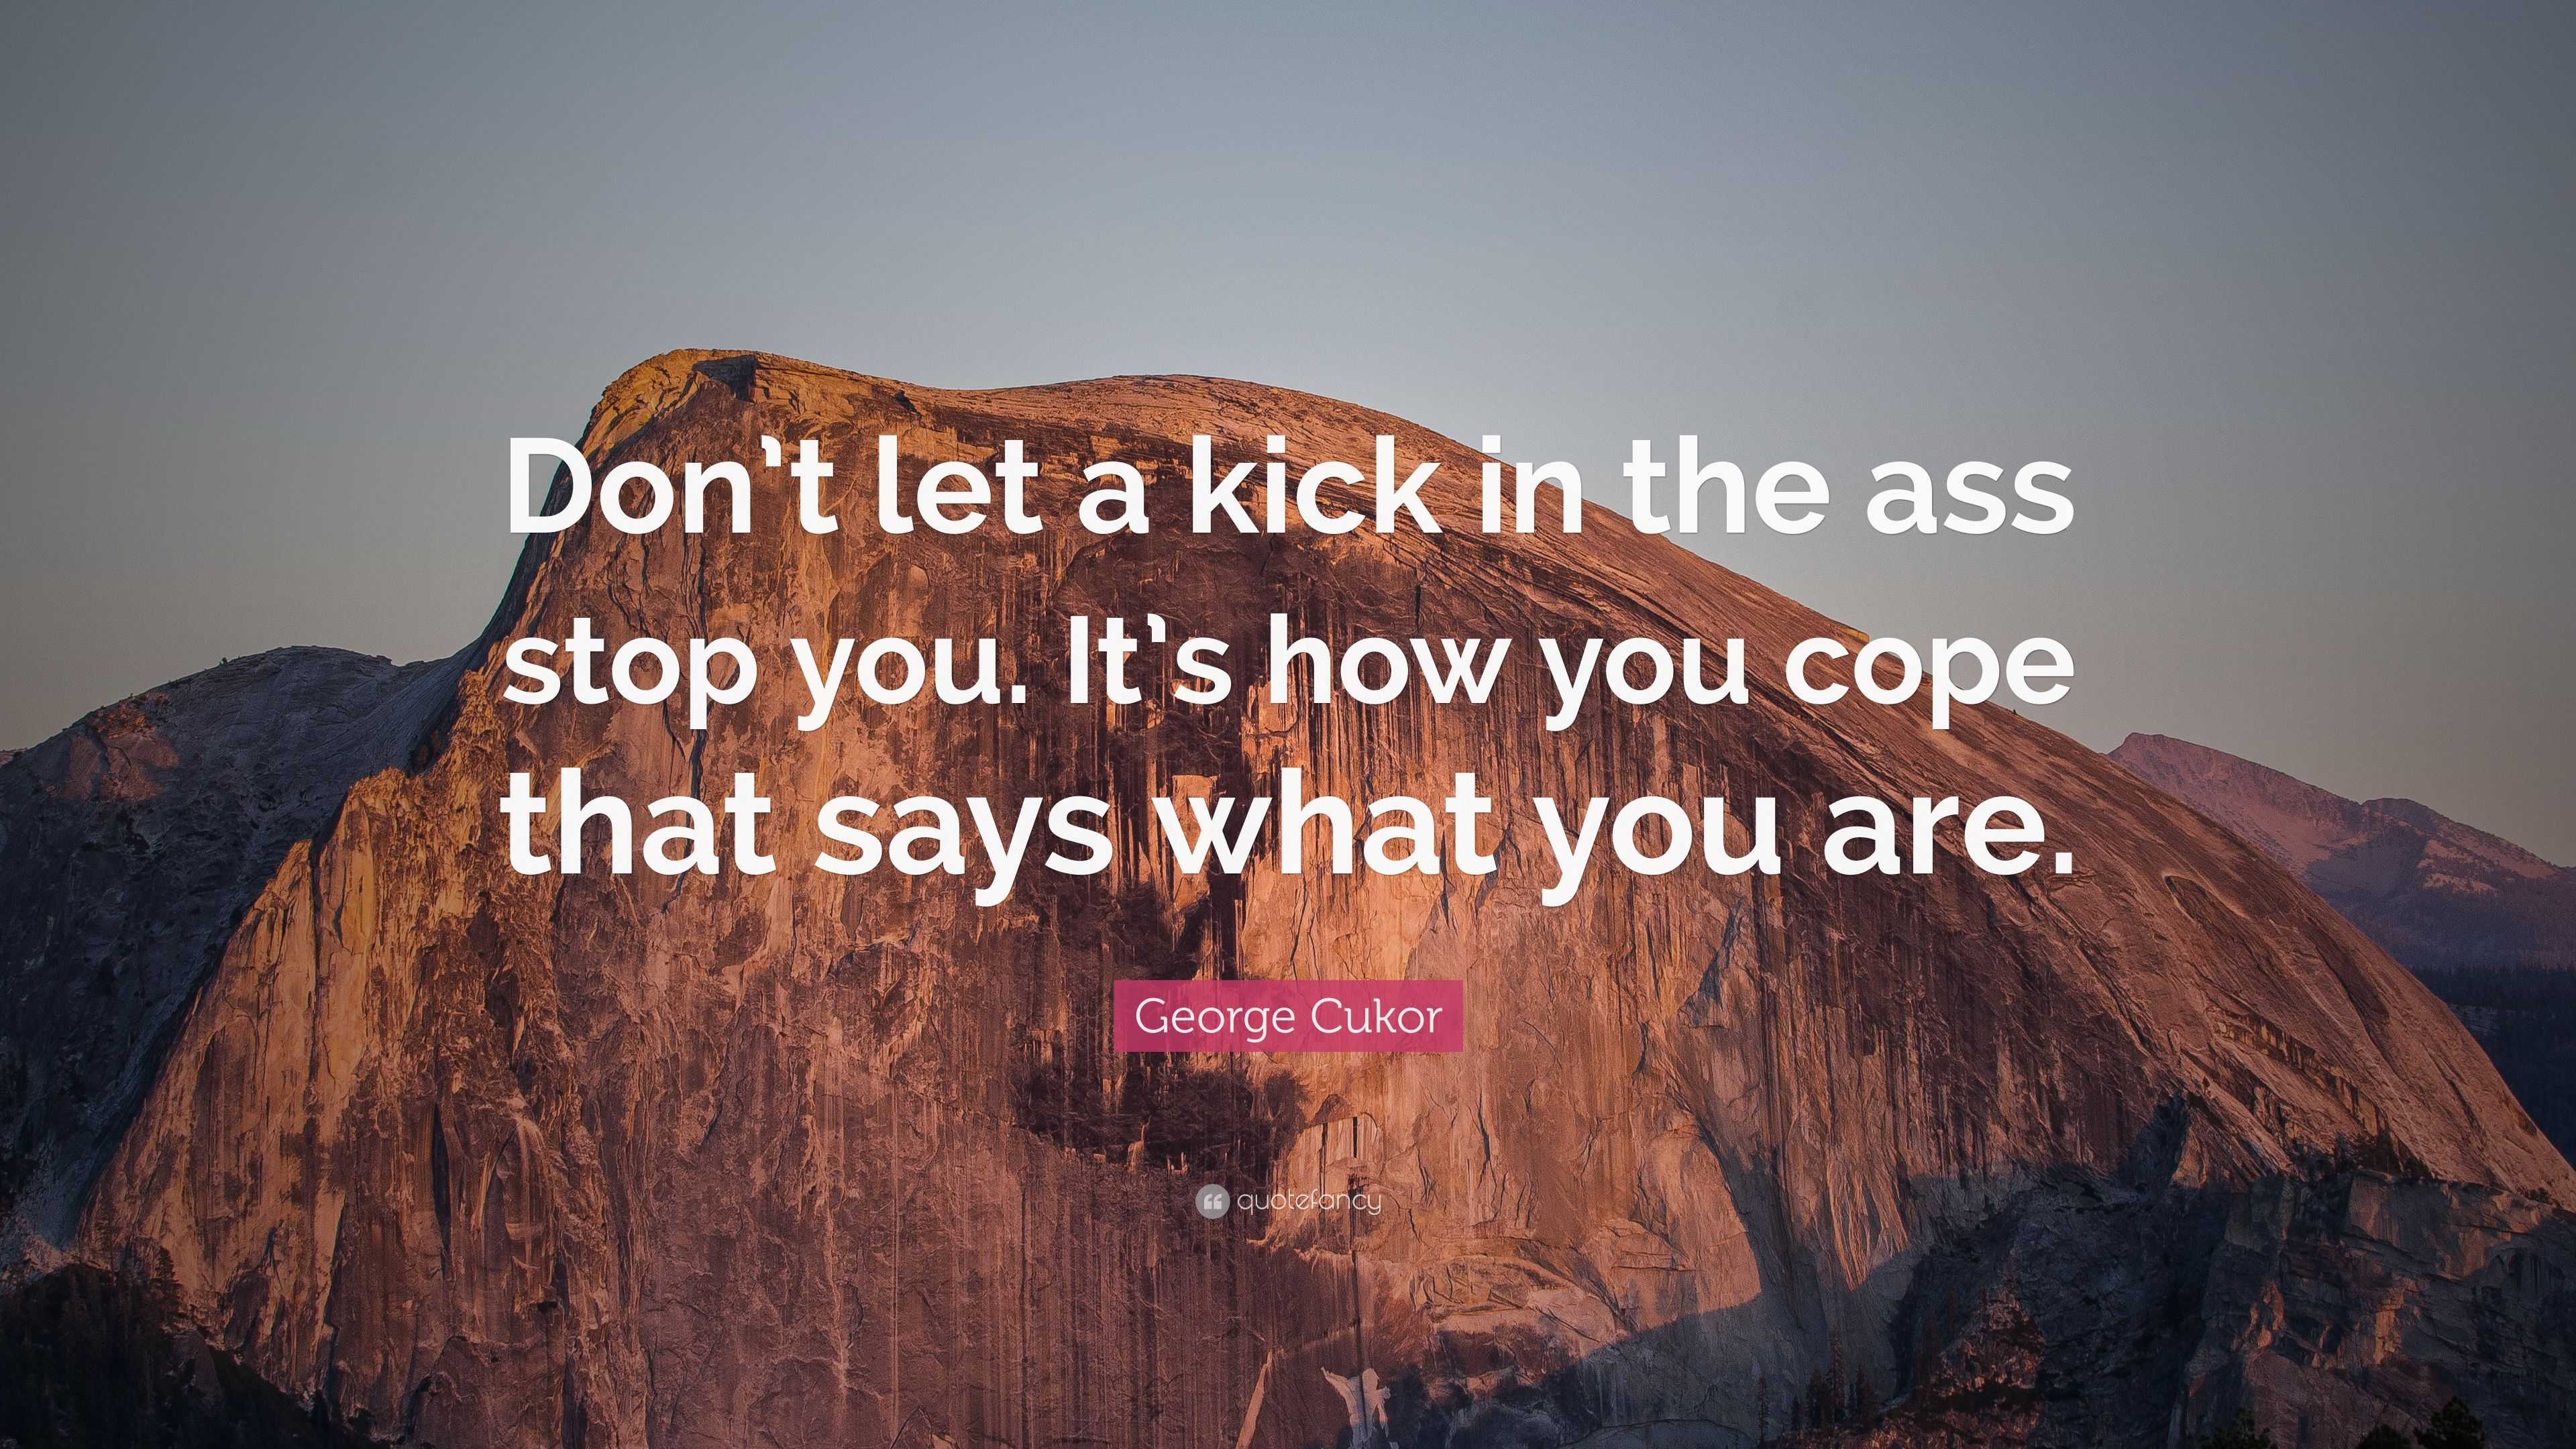 George Cukor Quote: “Don’t let a kick in the ass stop you. It’s how you